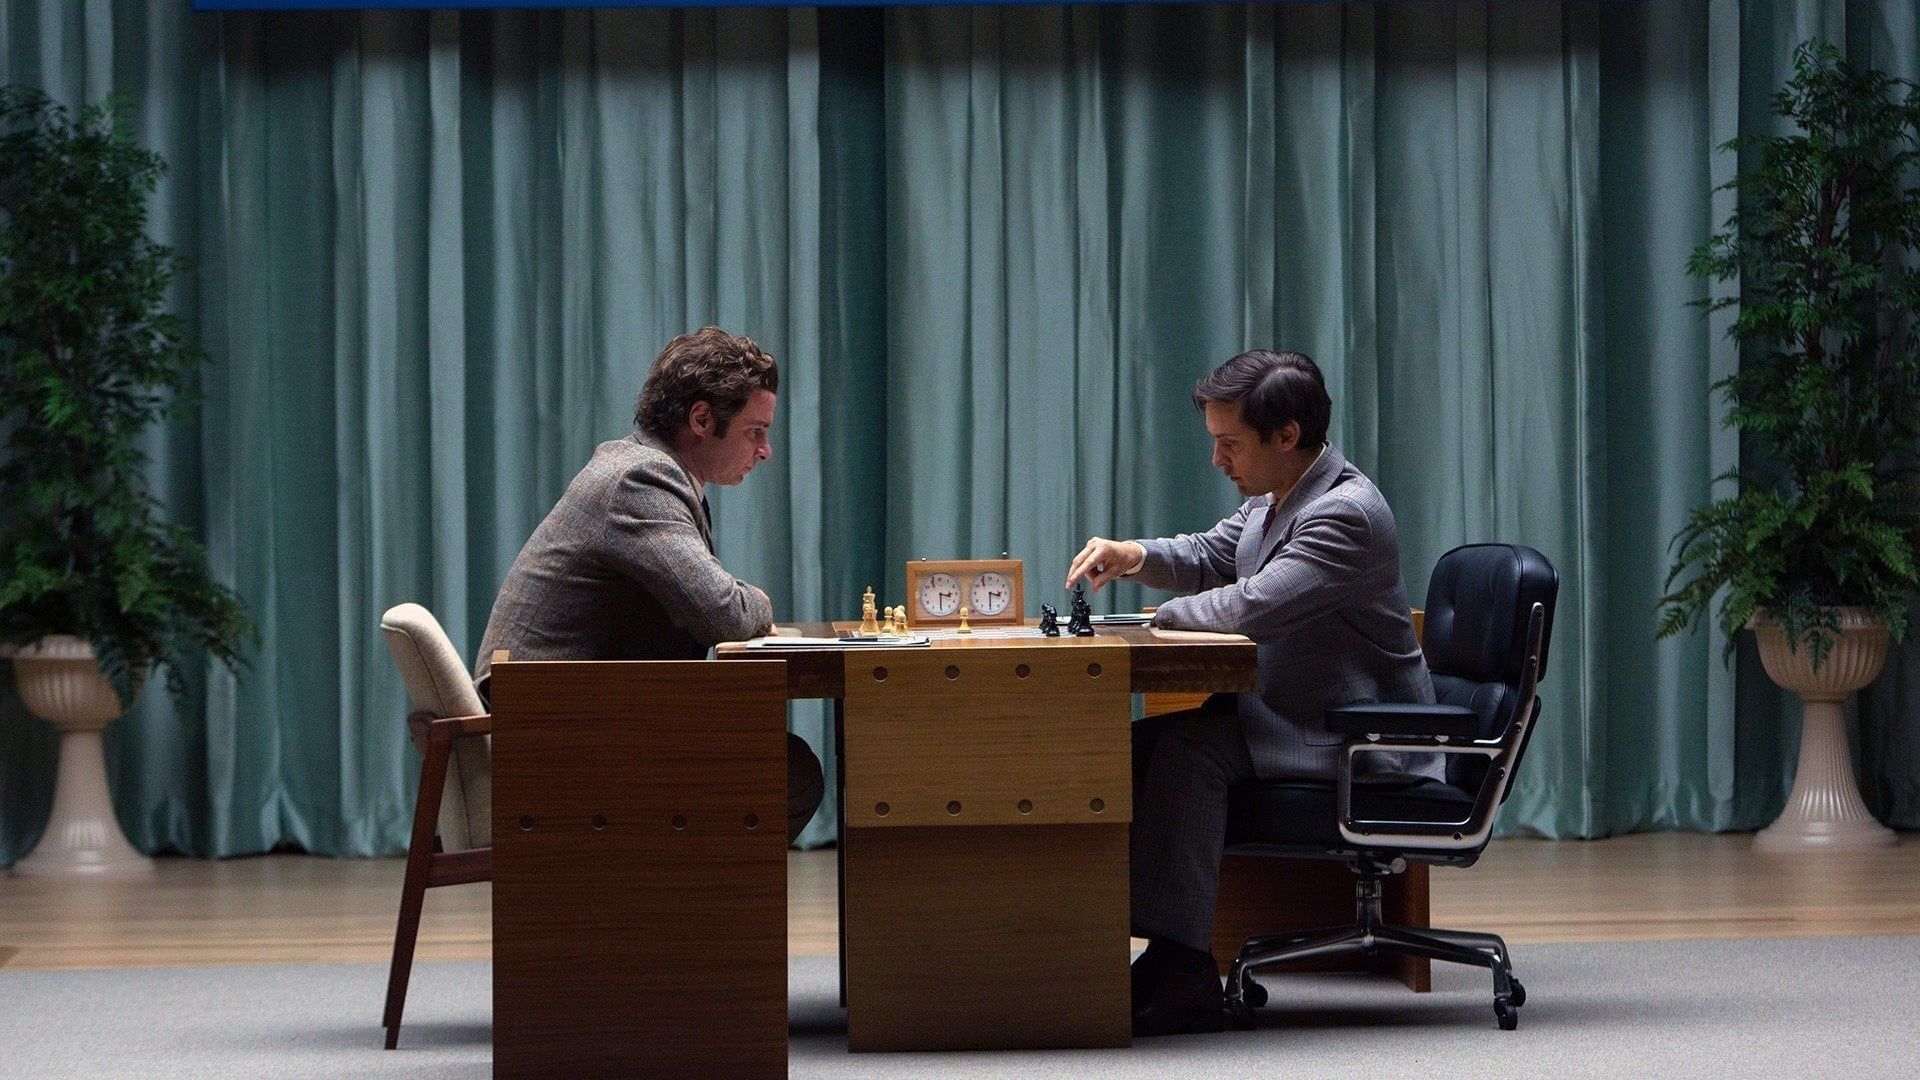 Watch Pawn Sacrifice (2014) Online, Free Trial, The Roku Channel